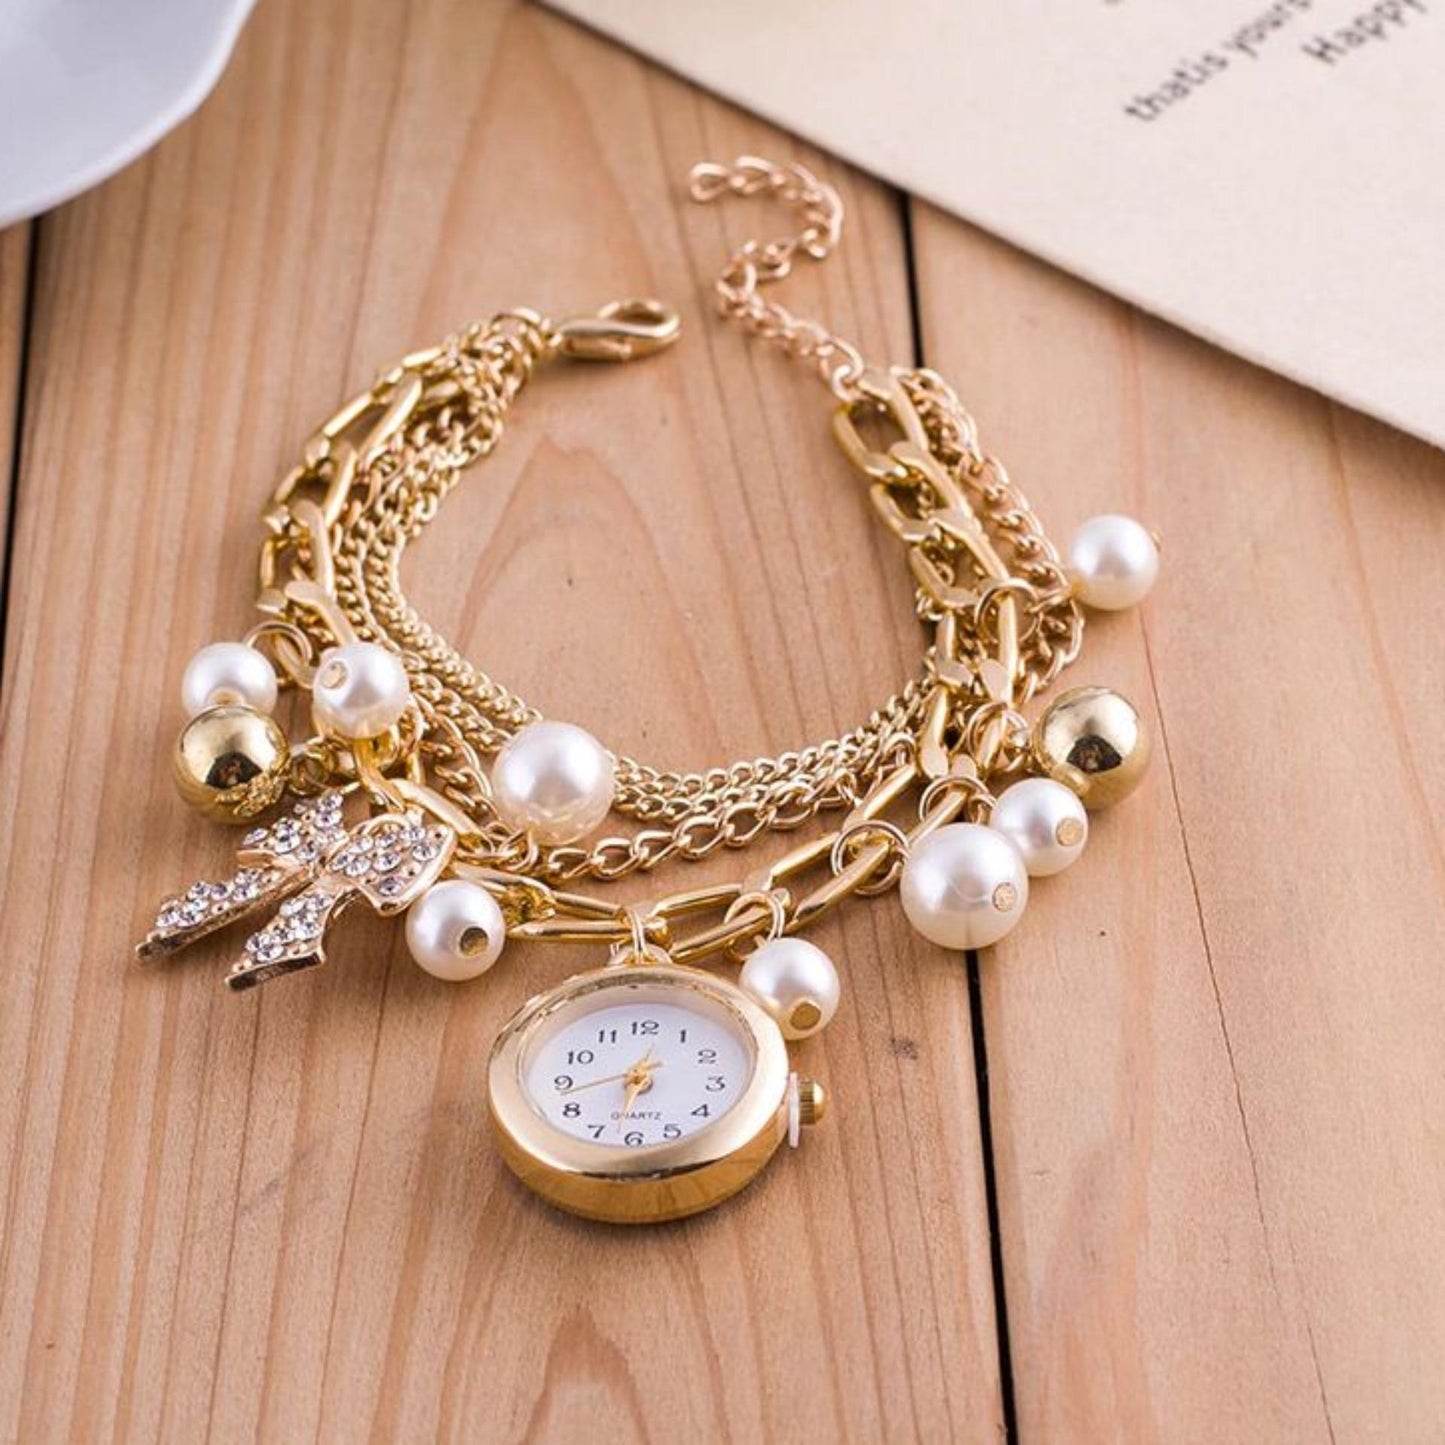 Stylish Gold Chain Watch for Fashion Enthusiasts